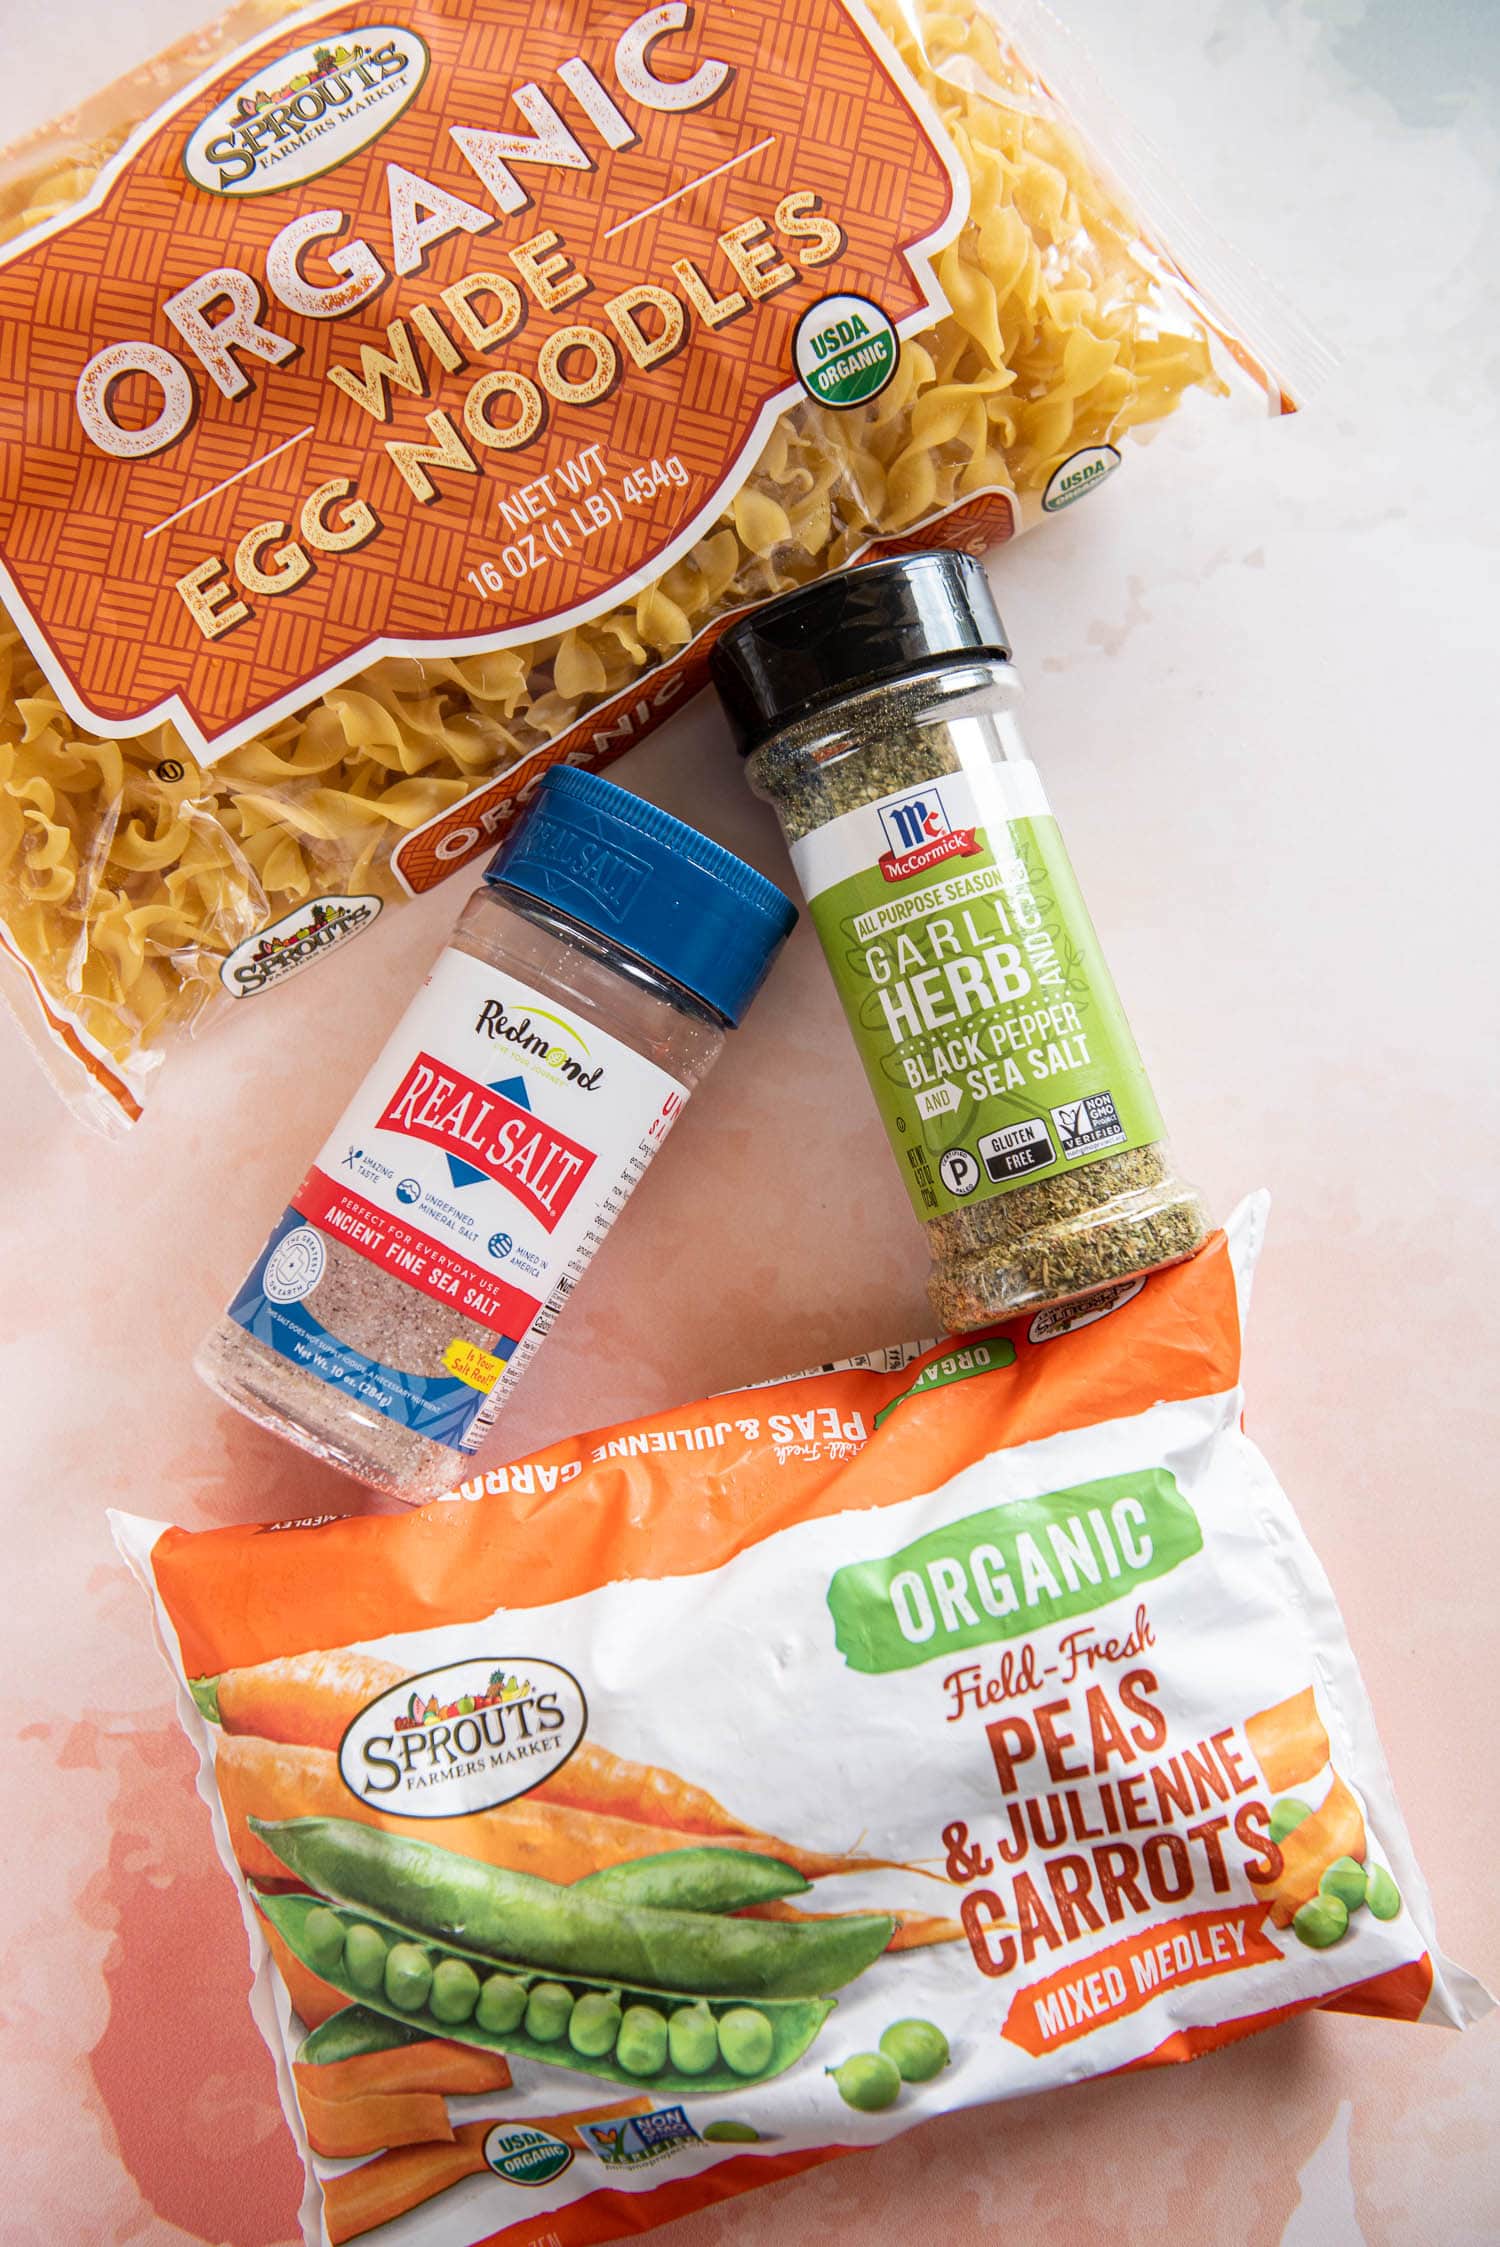 egg noodle package, bottle of real salt, bottle of garlic herb seasoning and bag of organic frozen peas and carrots